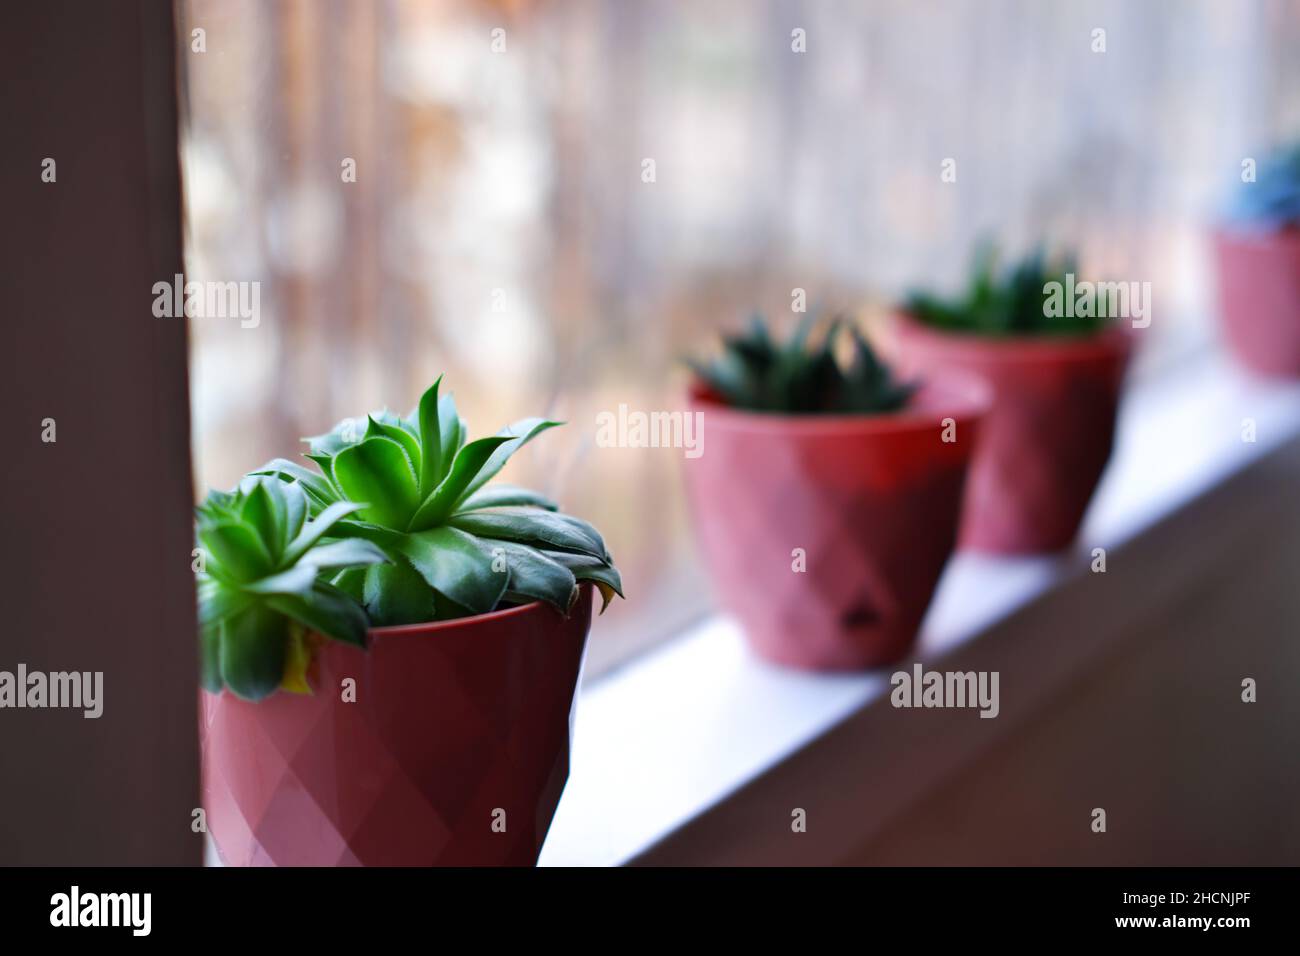 Cactus, haworthia and other small houseplants in line bookeh Stock Photo